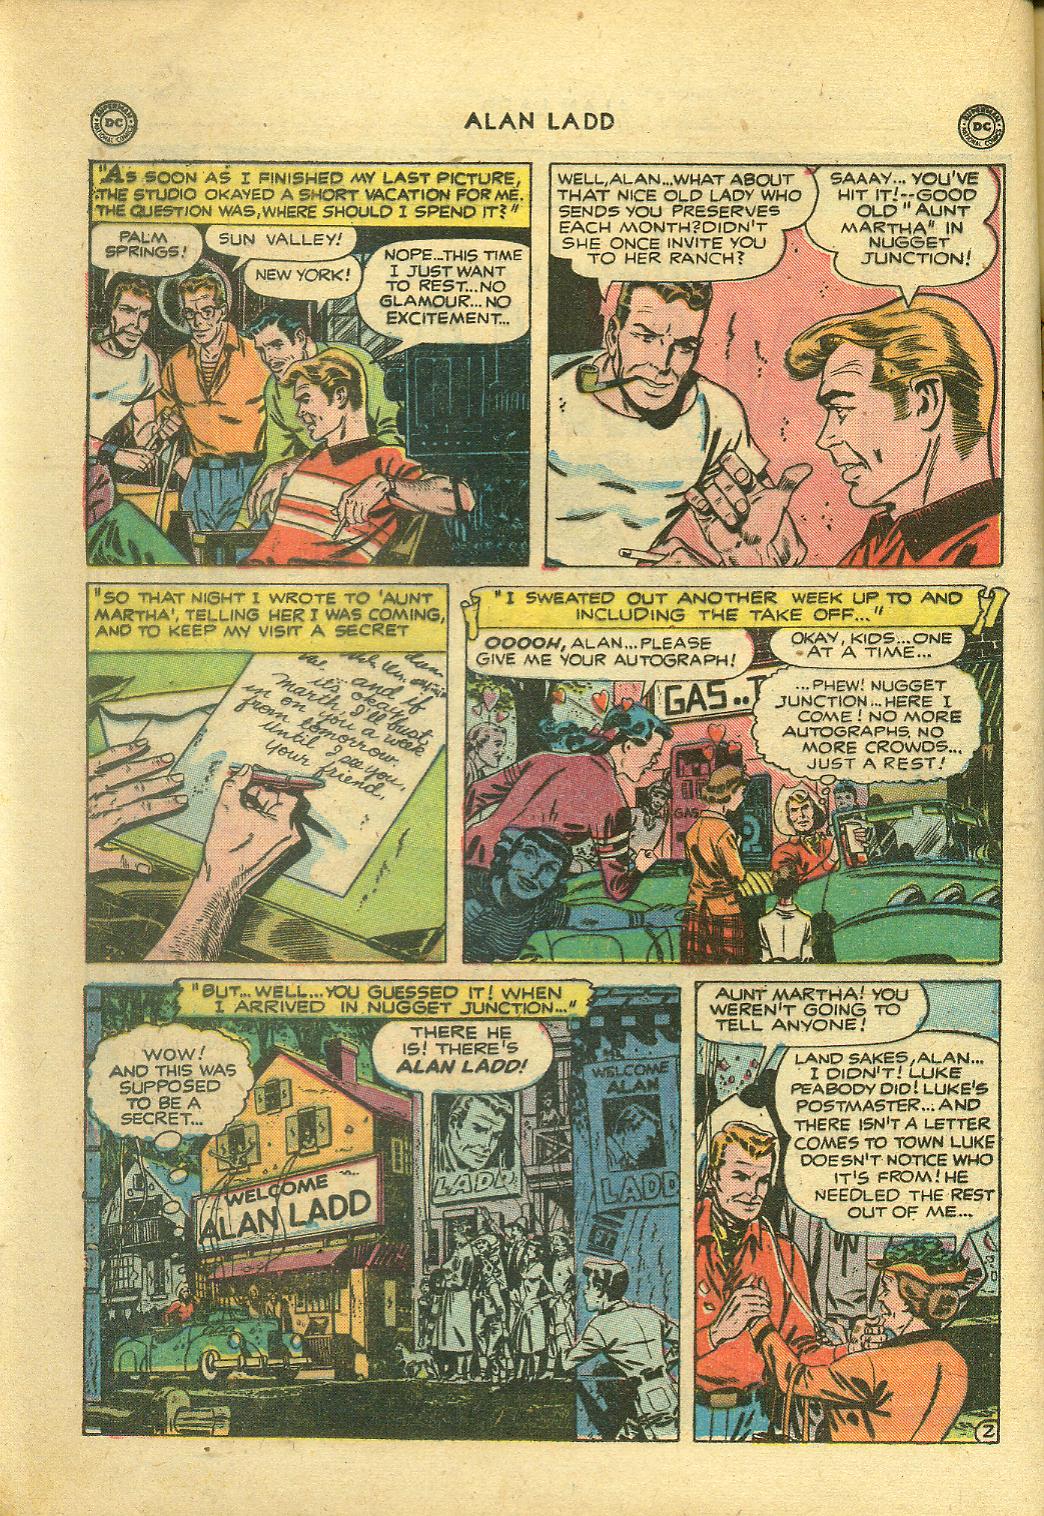 Read online Adventures of Alan Ladd comic -  Issue #2 - 22